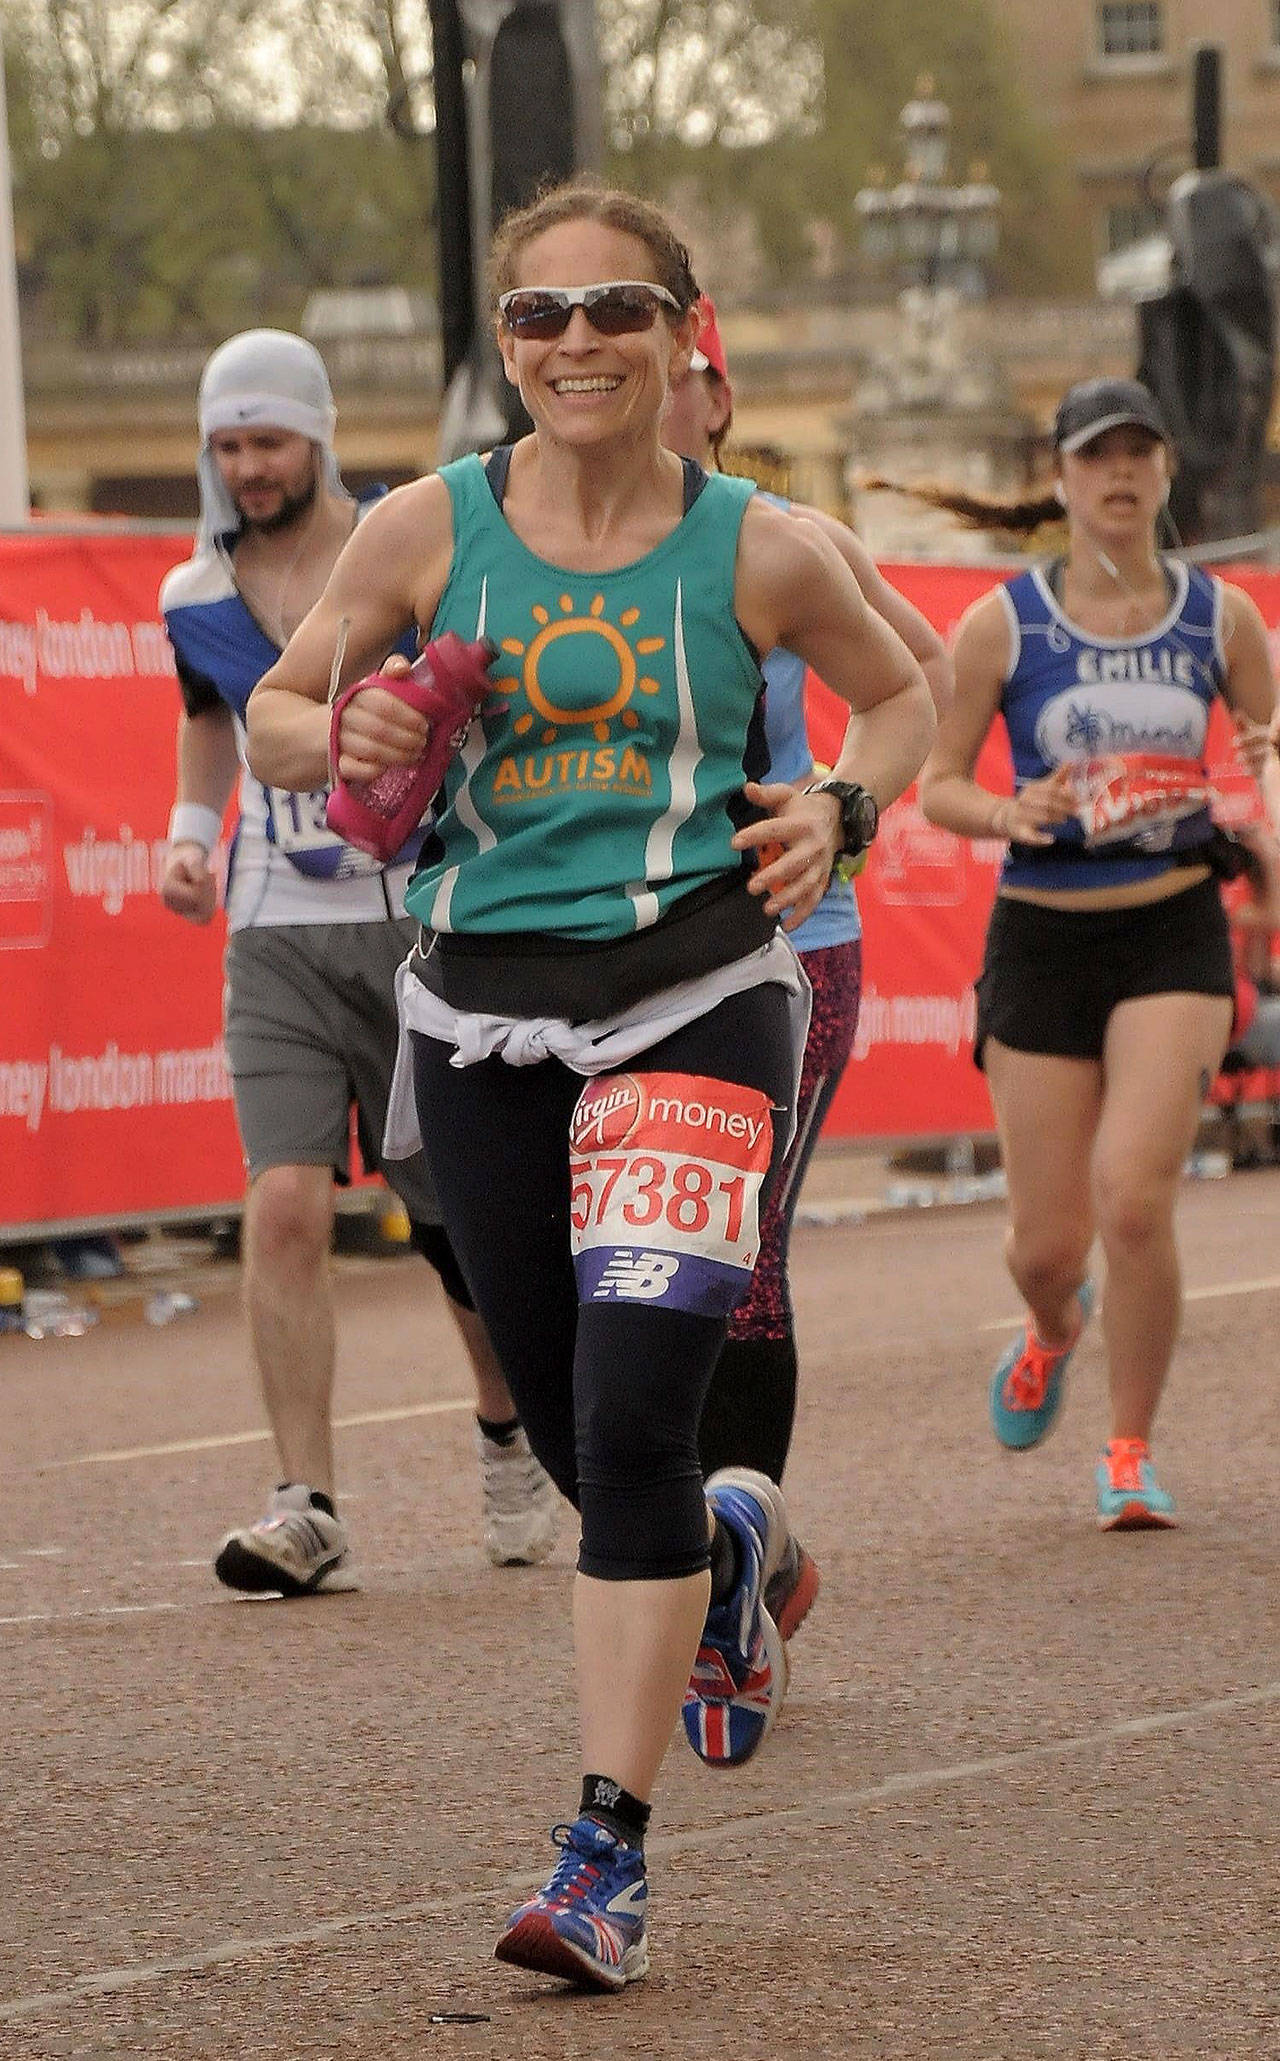 Monica Byerly competed in the London Marathon on April 22. Byerly, a Snohomish resident and a teacher and Monroe’s Hidden River Middle School, has completed three of the world’s six most prestigious marathons, and runs to support autism awareness and research. (Photo provided by Monica Byerly)